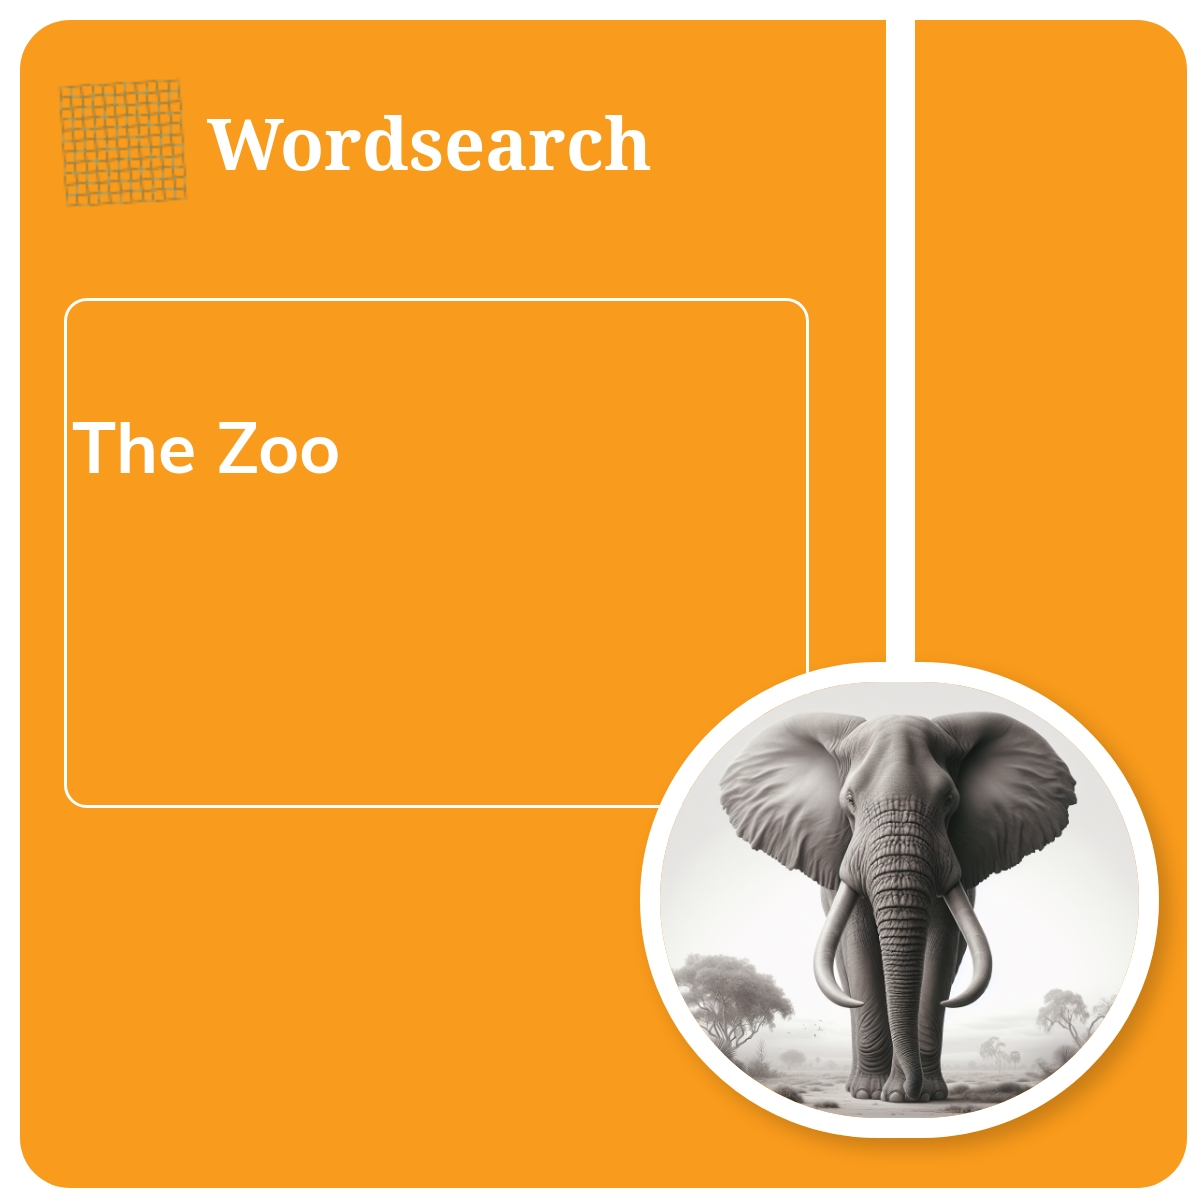 Wordsearch: The Zoo